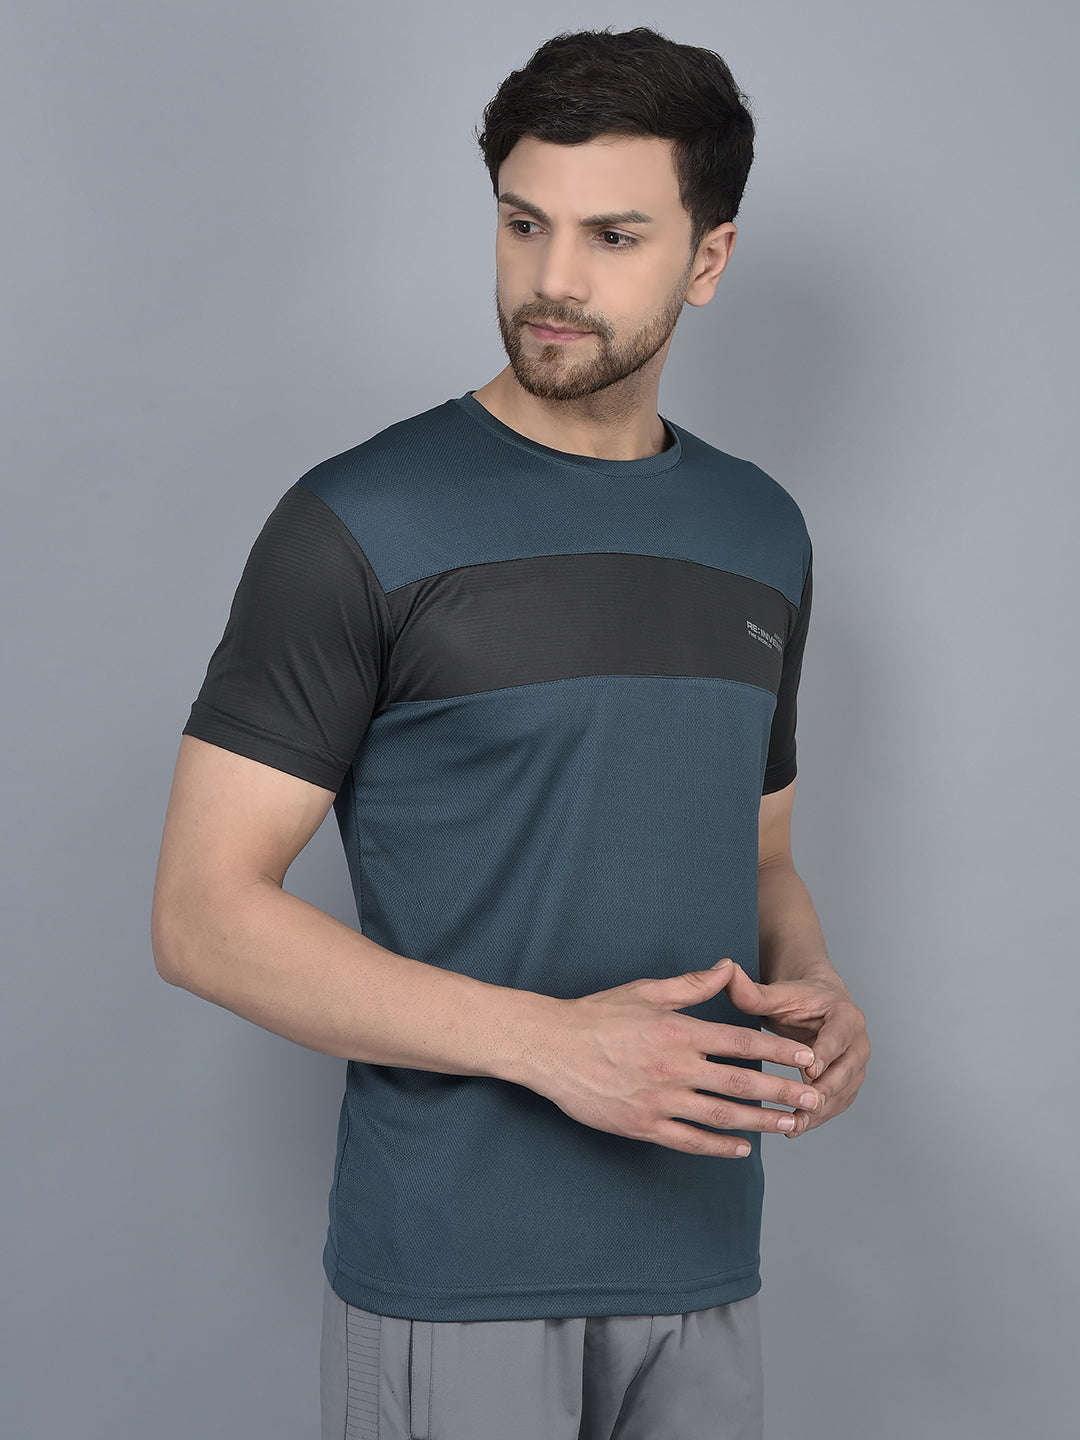 Cobb Teal Solid Round Neck T-Shirt